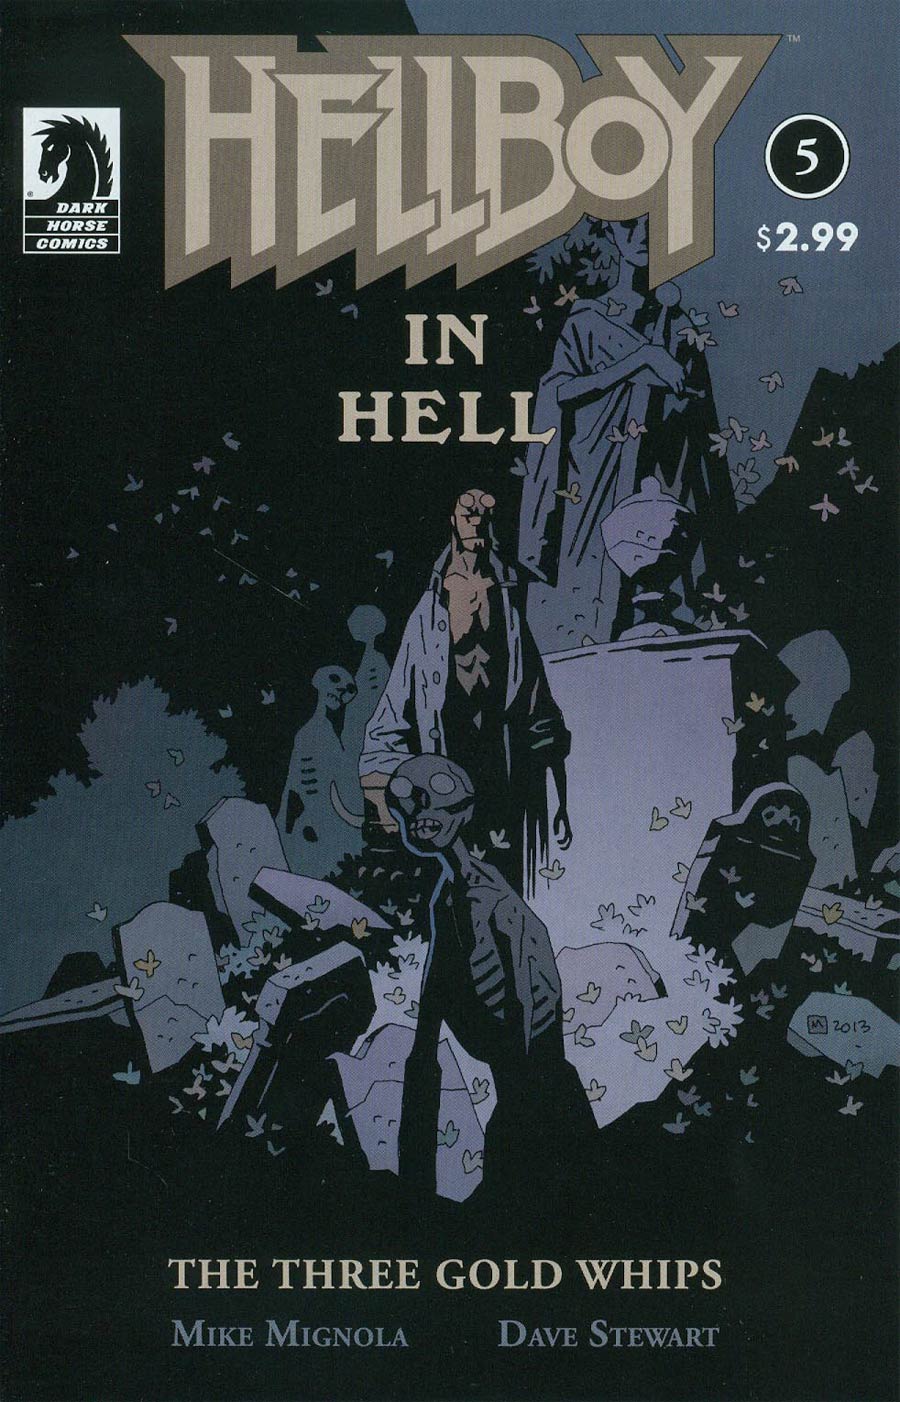 Hellboy In Hell #5